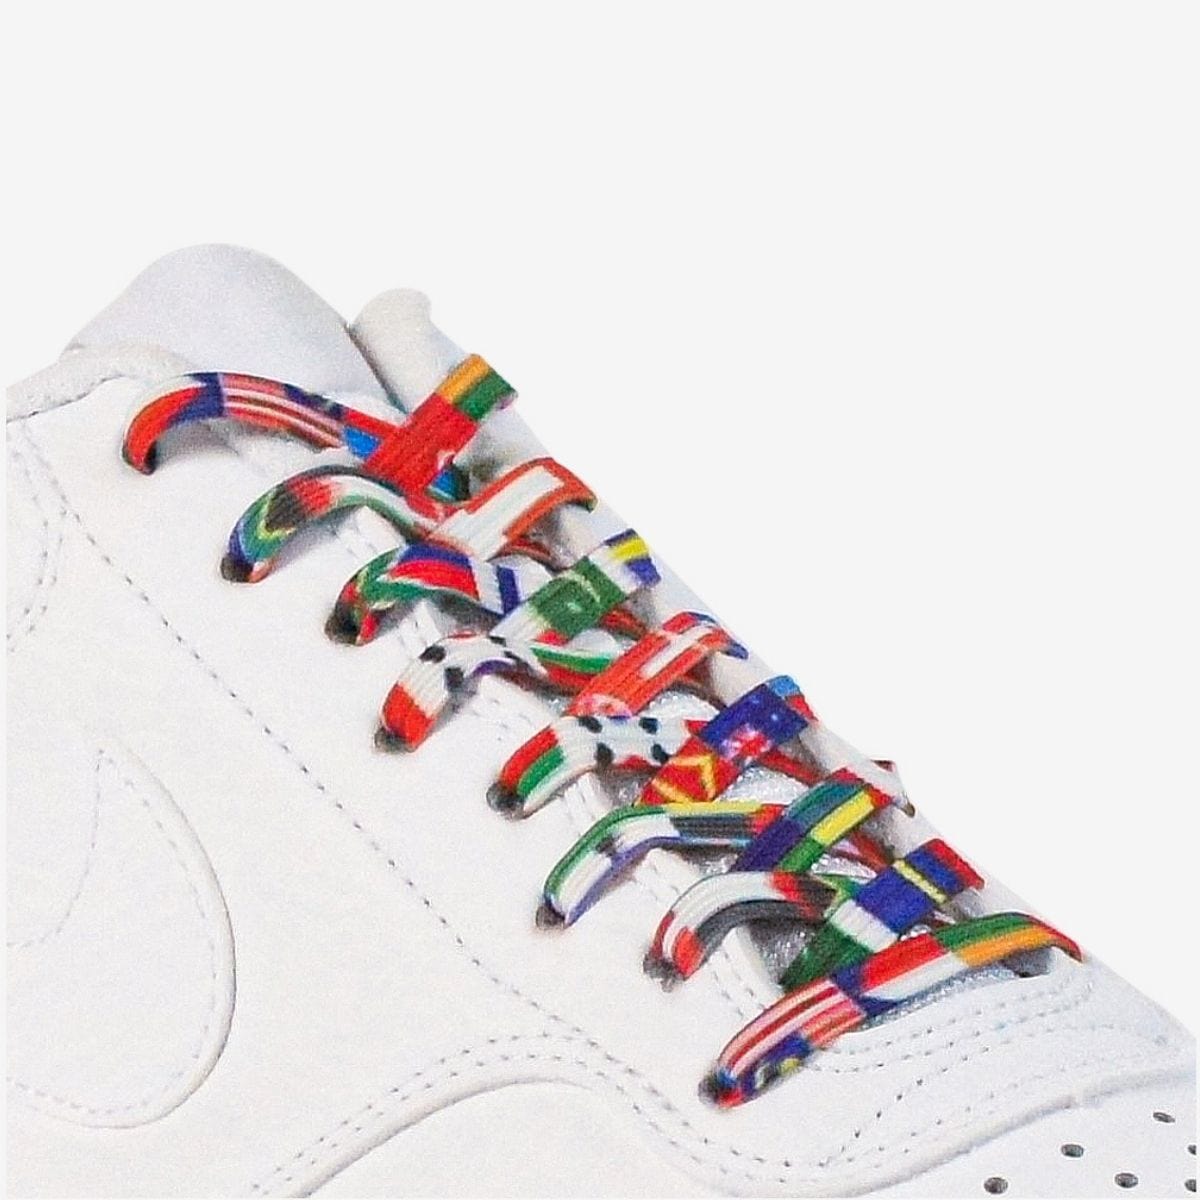 different-ways-to-lace-shoes-with-national-flags-elastic-shoelaces-on-white-kicks